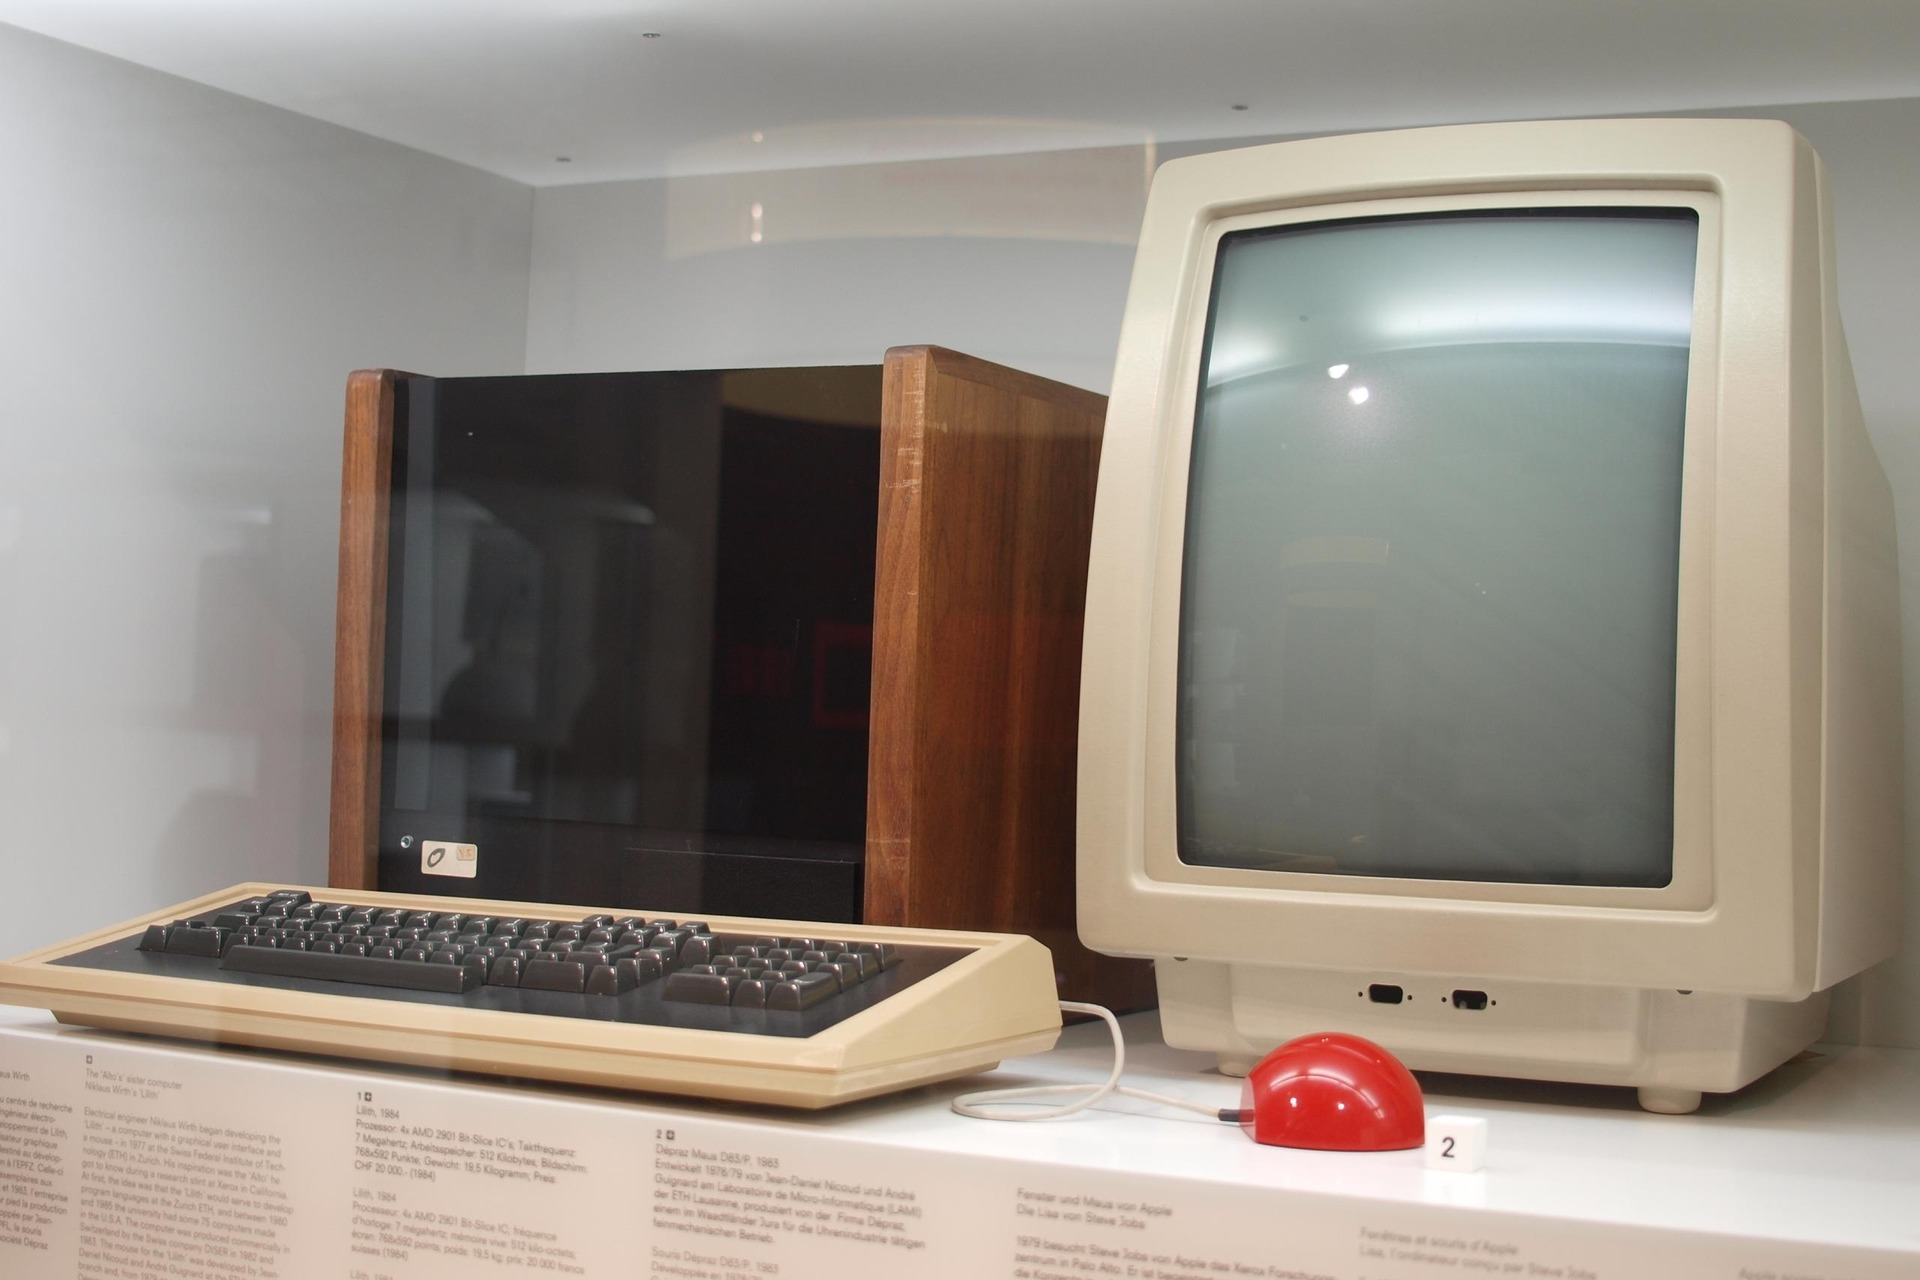 Niklaus Wirth: Lilith was one of the world's first workstations